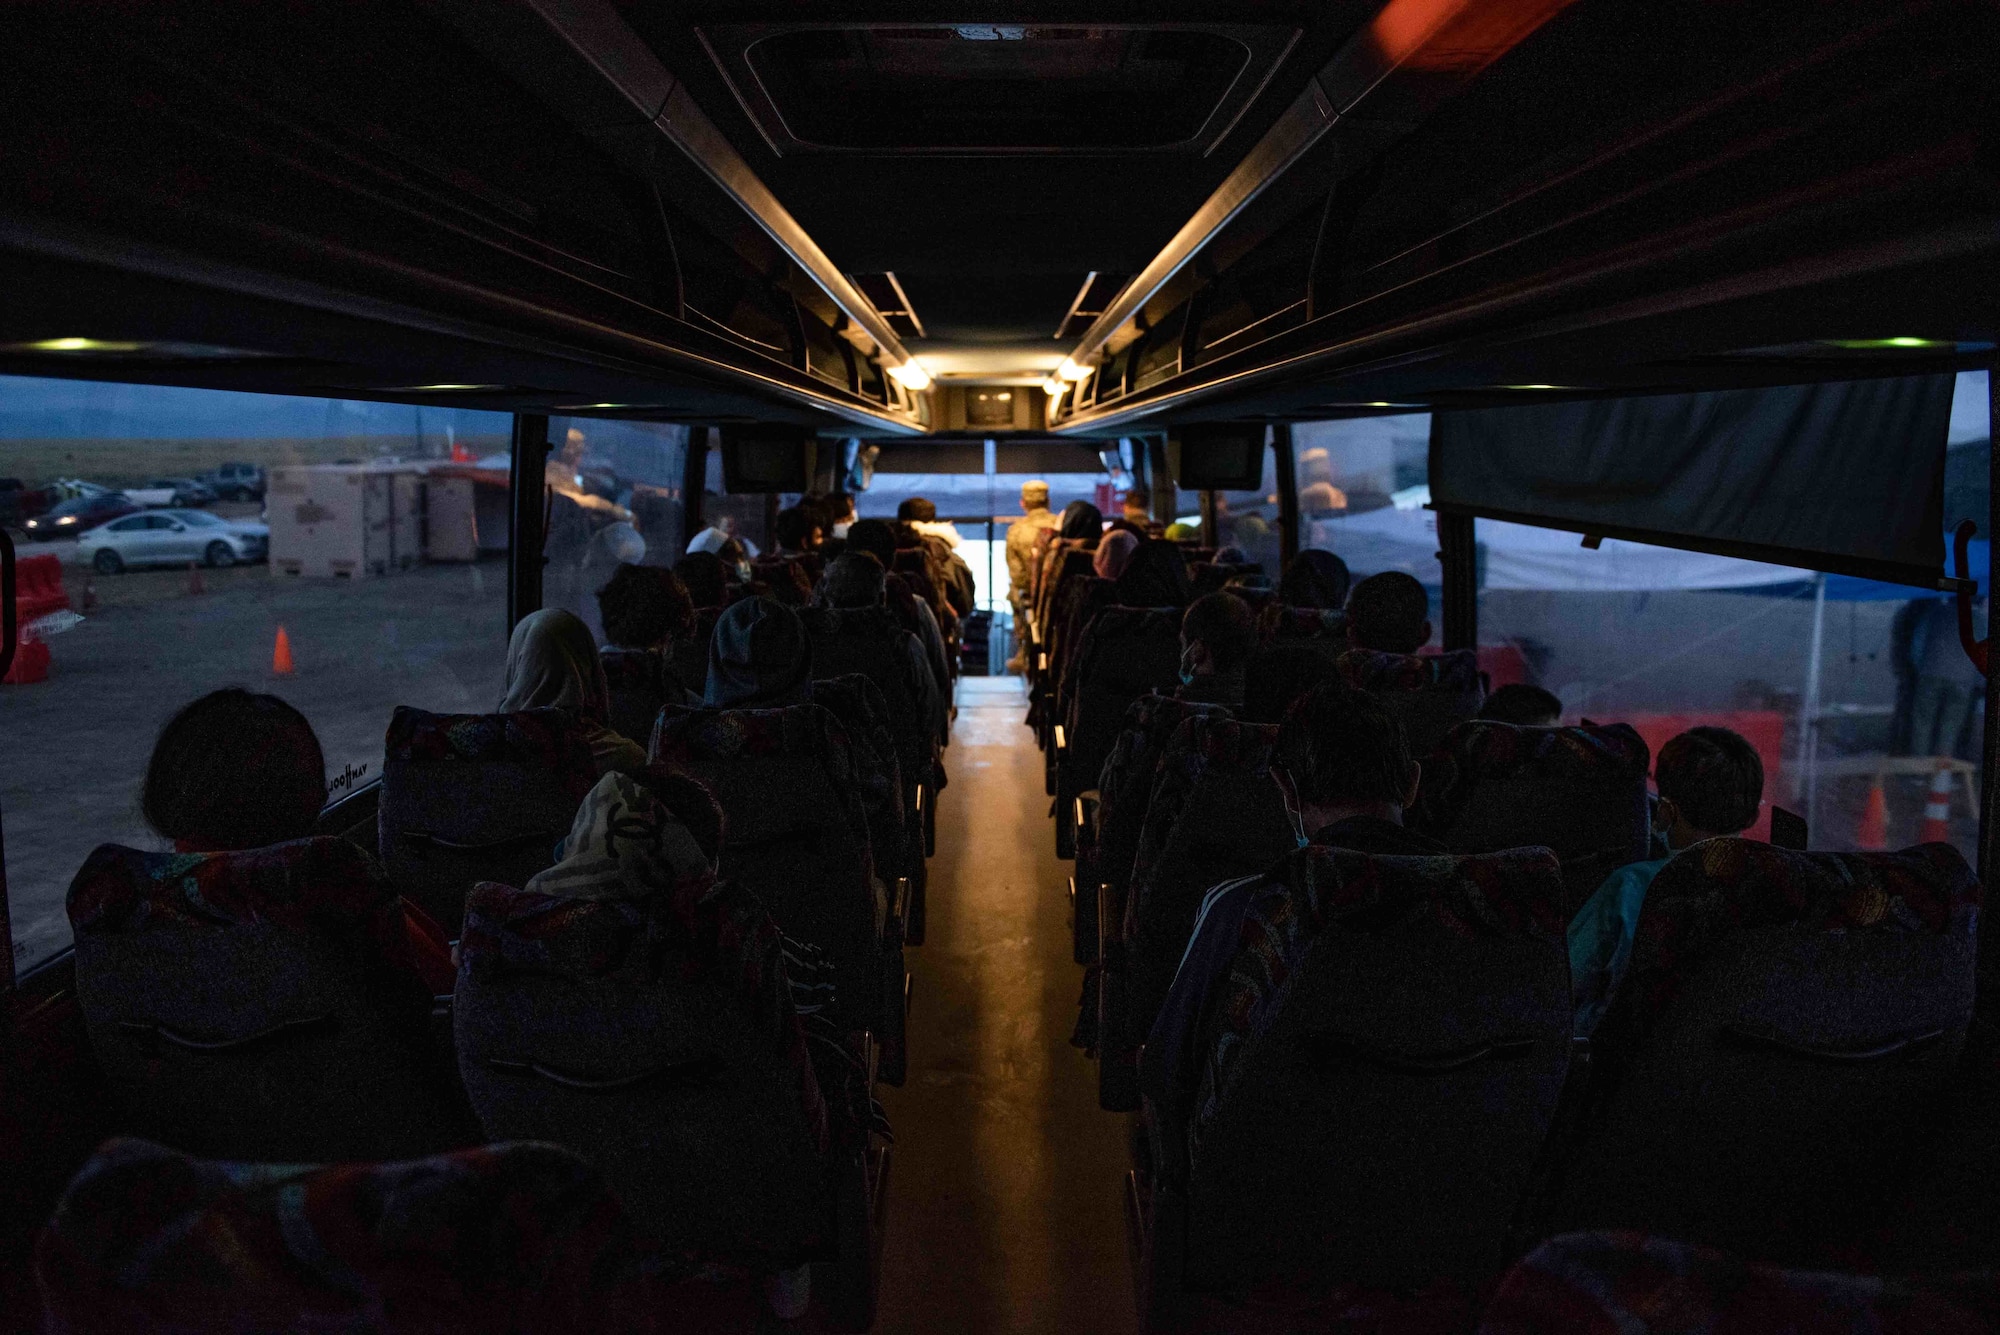 Afghan families wait on a bus at Task Force-Holloman's Aman Omid Village, before starting the resettlement process on Holloman Air Force Base, Sept. 28, 2021. The Department of Defense, through U.S. Northern Command, and in support of the Department of State and Department of Homeland Security, is providing transportation, temporary housing, medical screening, and general support for at least 50,000 Afghan evacuees at suitable facilities, in permanent or temporary structures, as quickly as possible. This initiative provides Afghan evacuees essential support at secure locations outside Afghanistan. (U.S. Air Force photo by Staff Sgt. Kenneth Boyton)